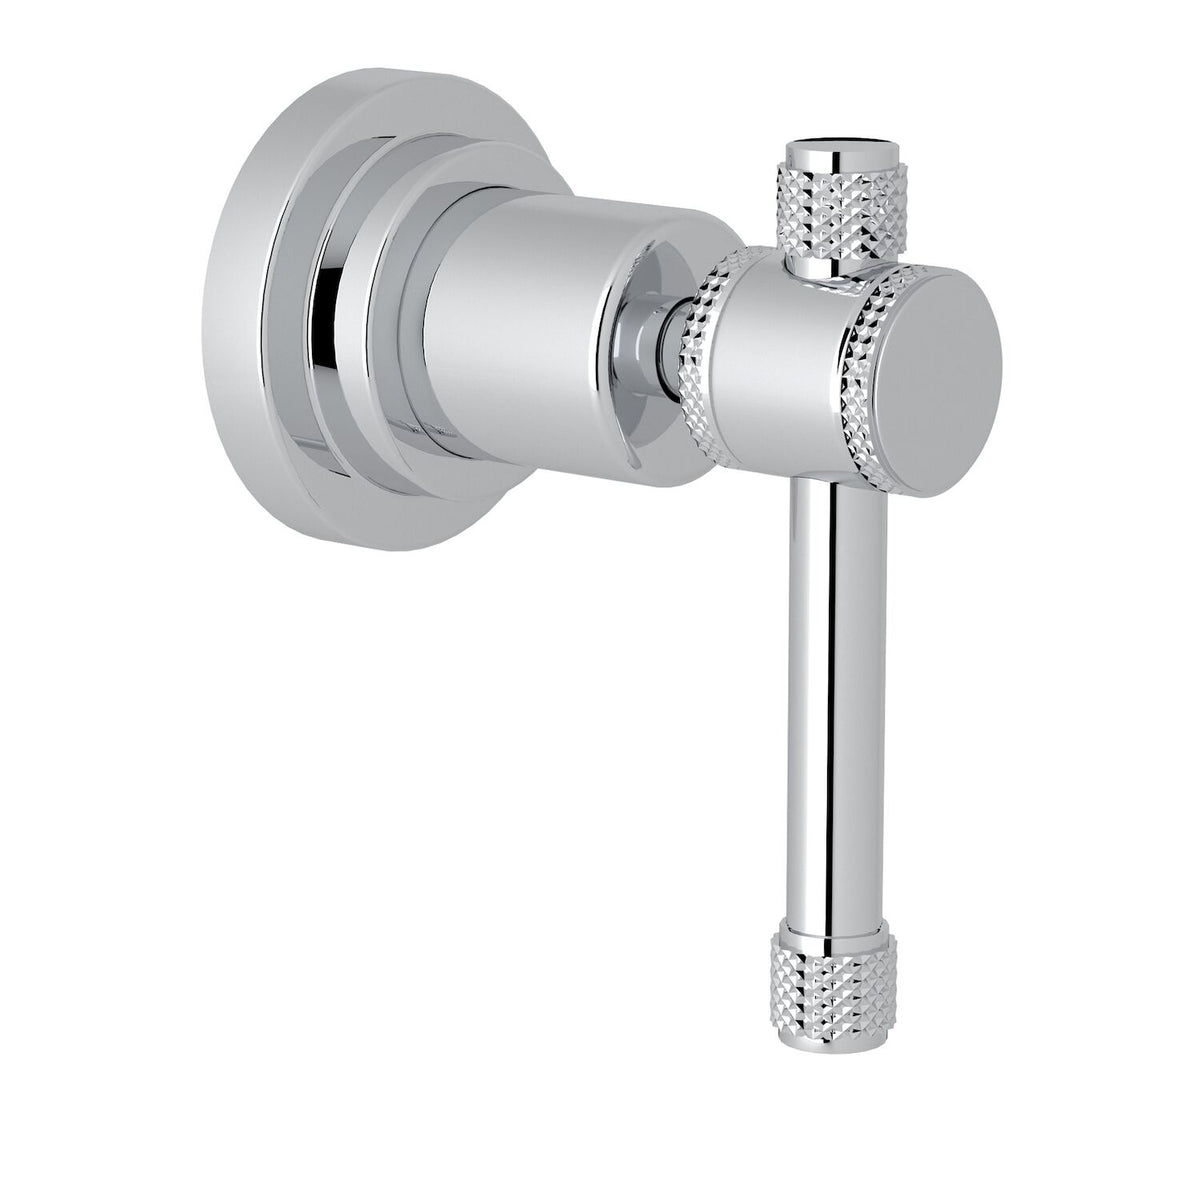 CAMPO™ TRIM FOR VOLUME CONTROL AND DIVERTER (INDUSTRIAL LEVER HANDLE)